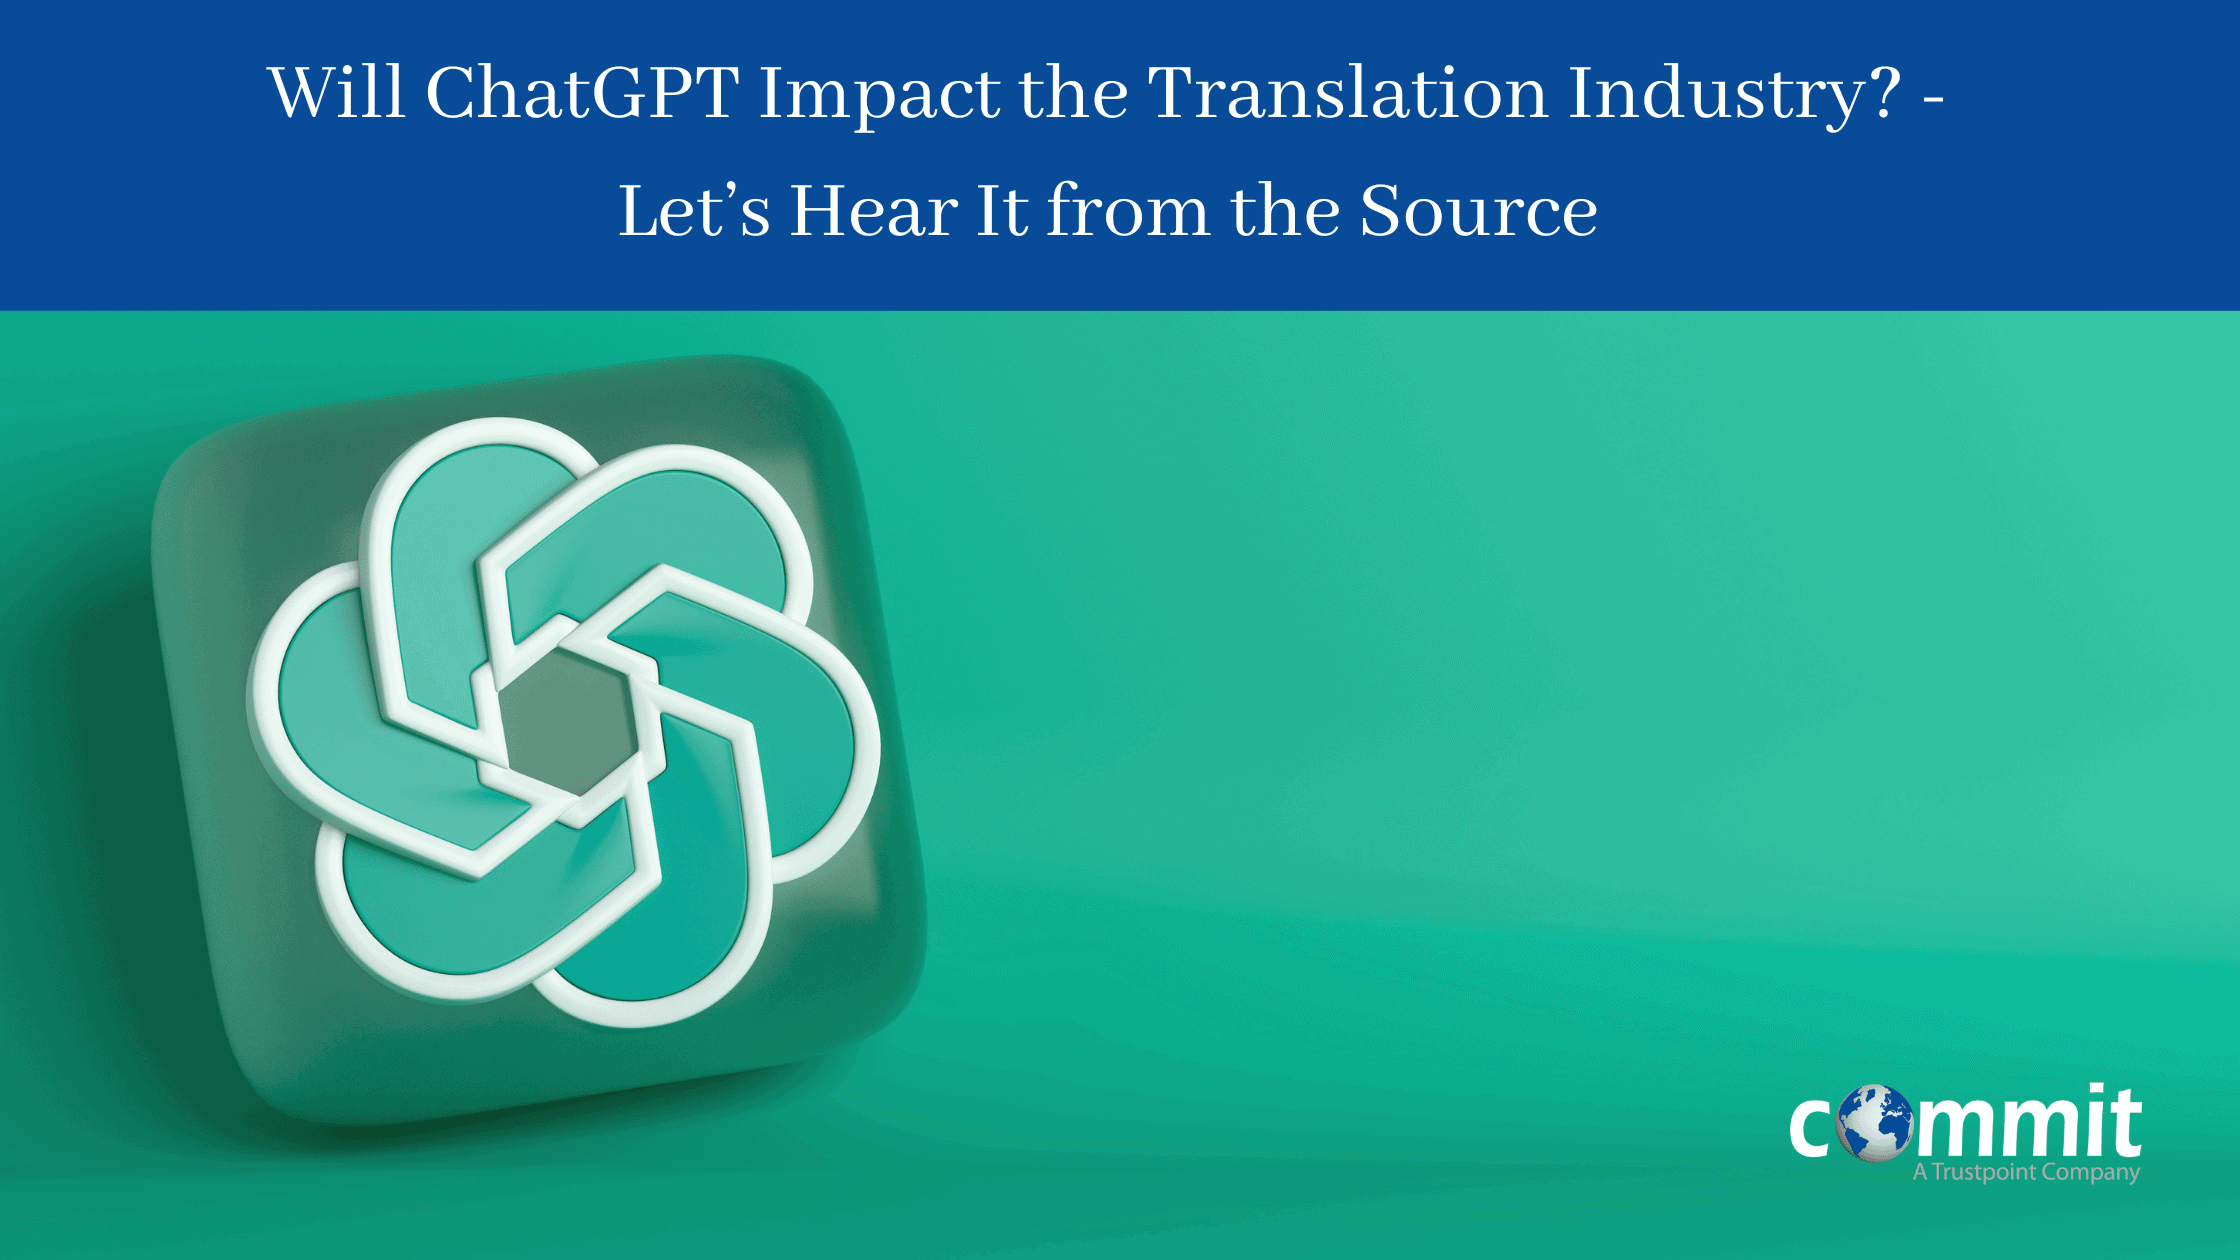 Will ChatGPT Impact the Translation Industry?